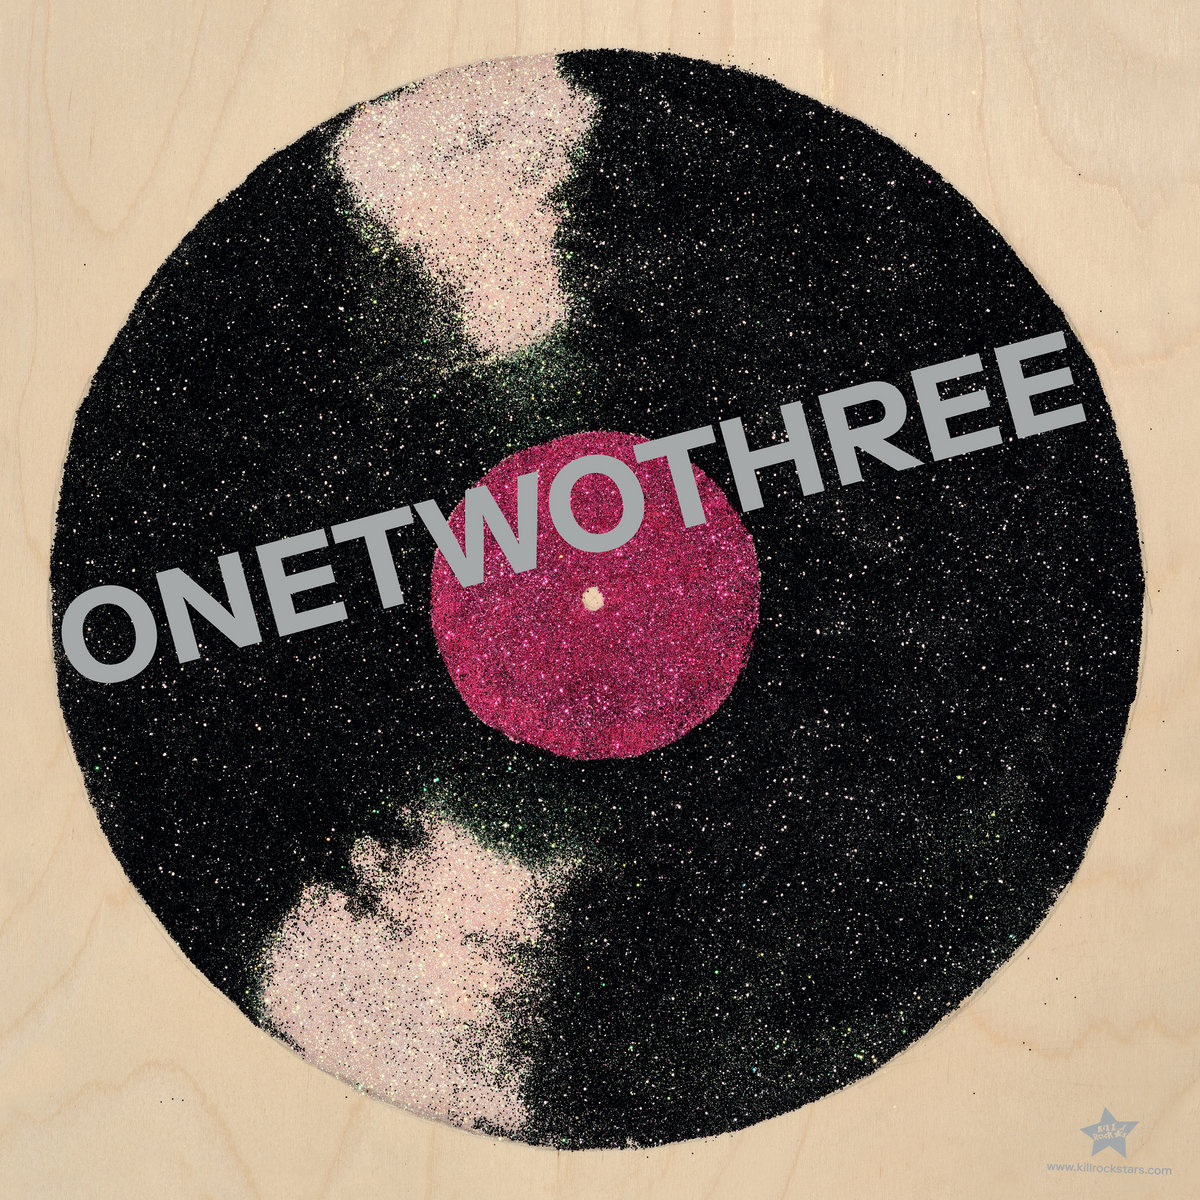 ONETWOTHREE - ONETWOTHREE